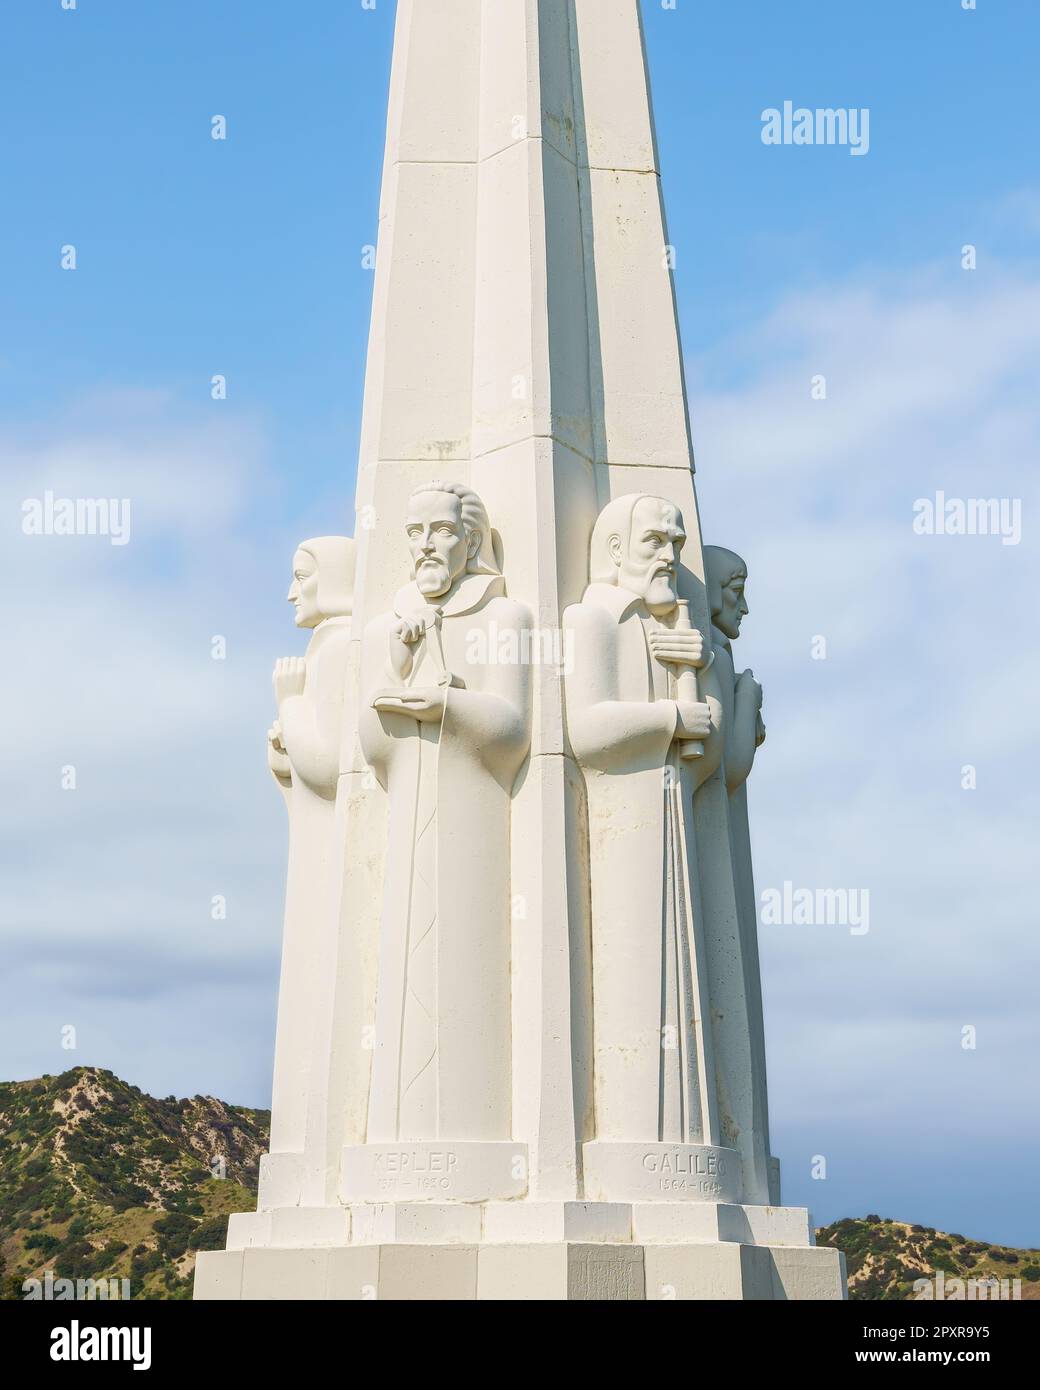 Astronomers Monument at Griffith Observatory in Los Angeles, California, USA. Six of the greatest astronomers. Kepler and Galileo Galilei in front. Stock Photo